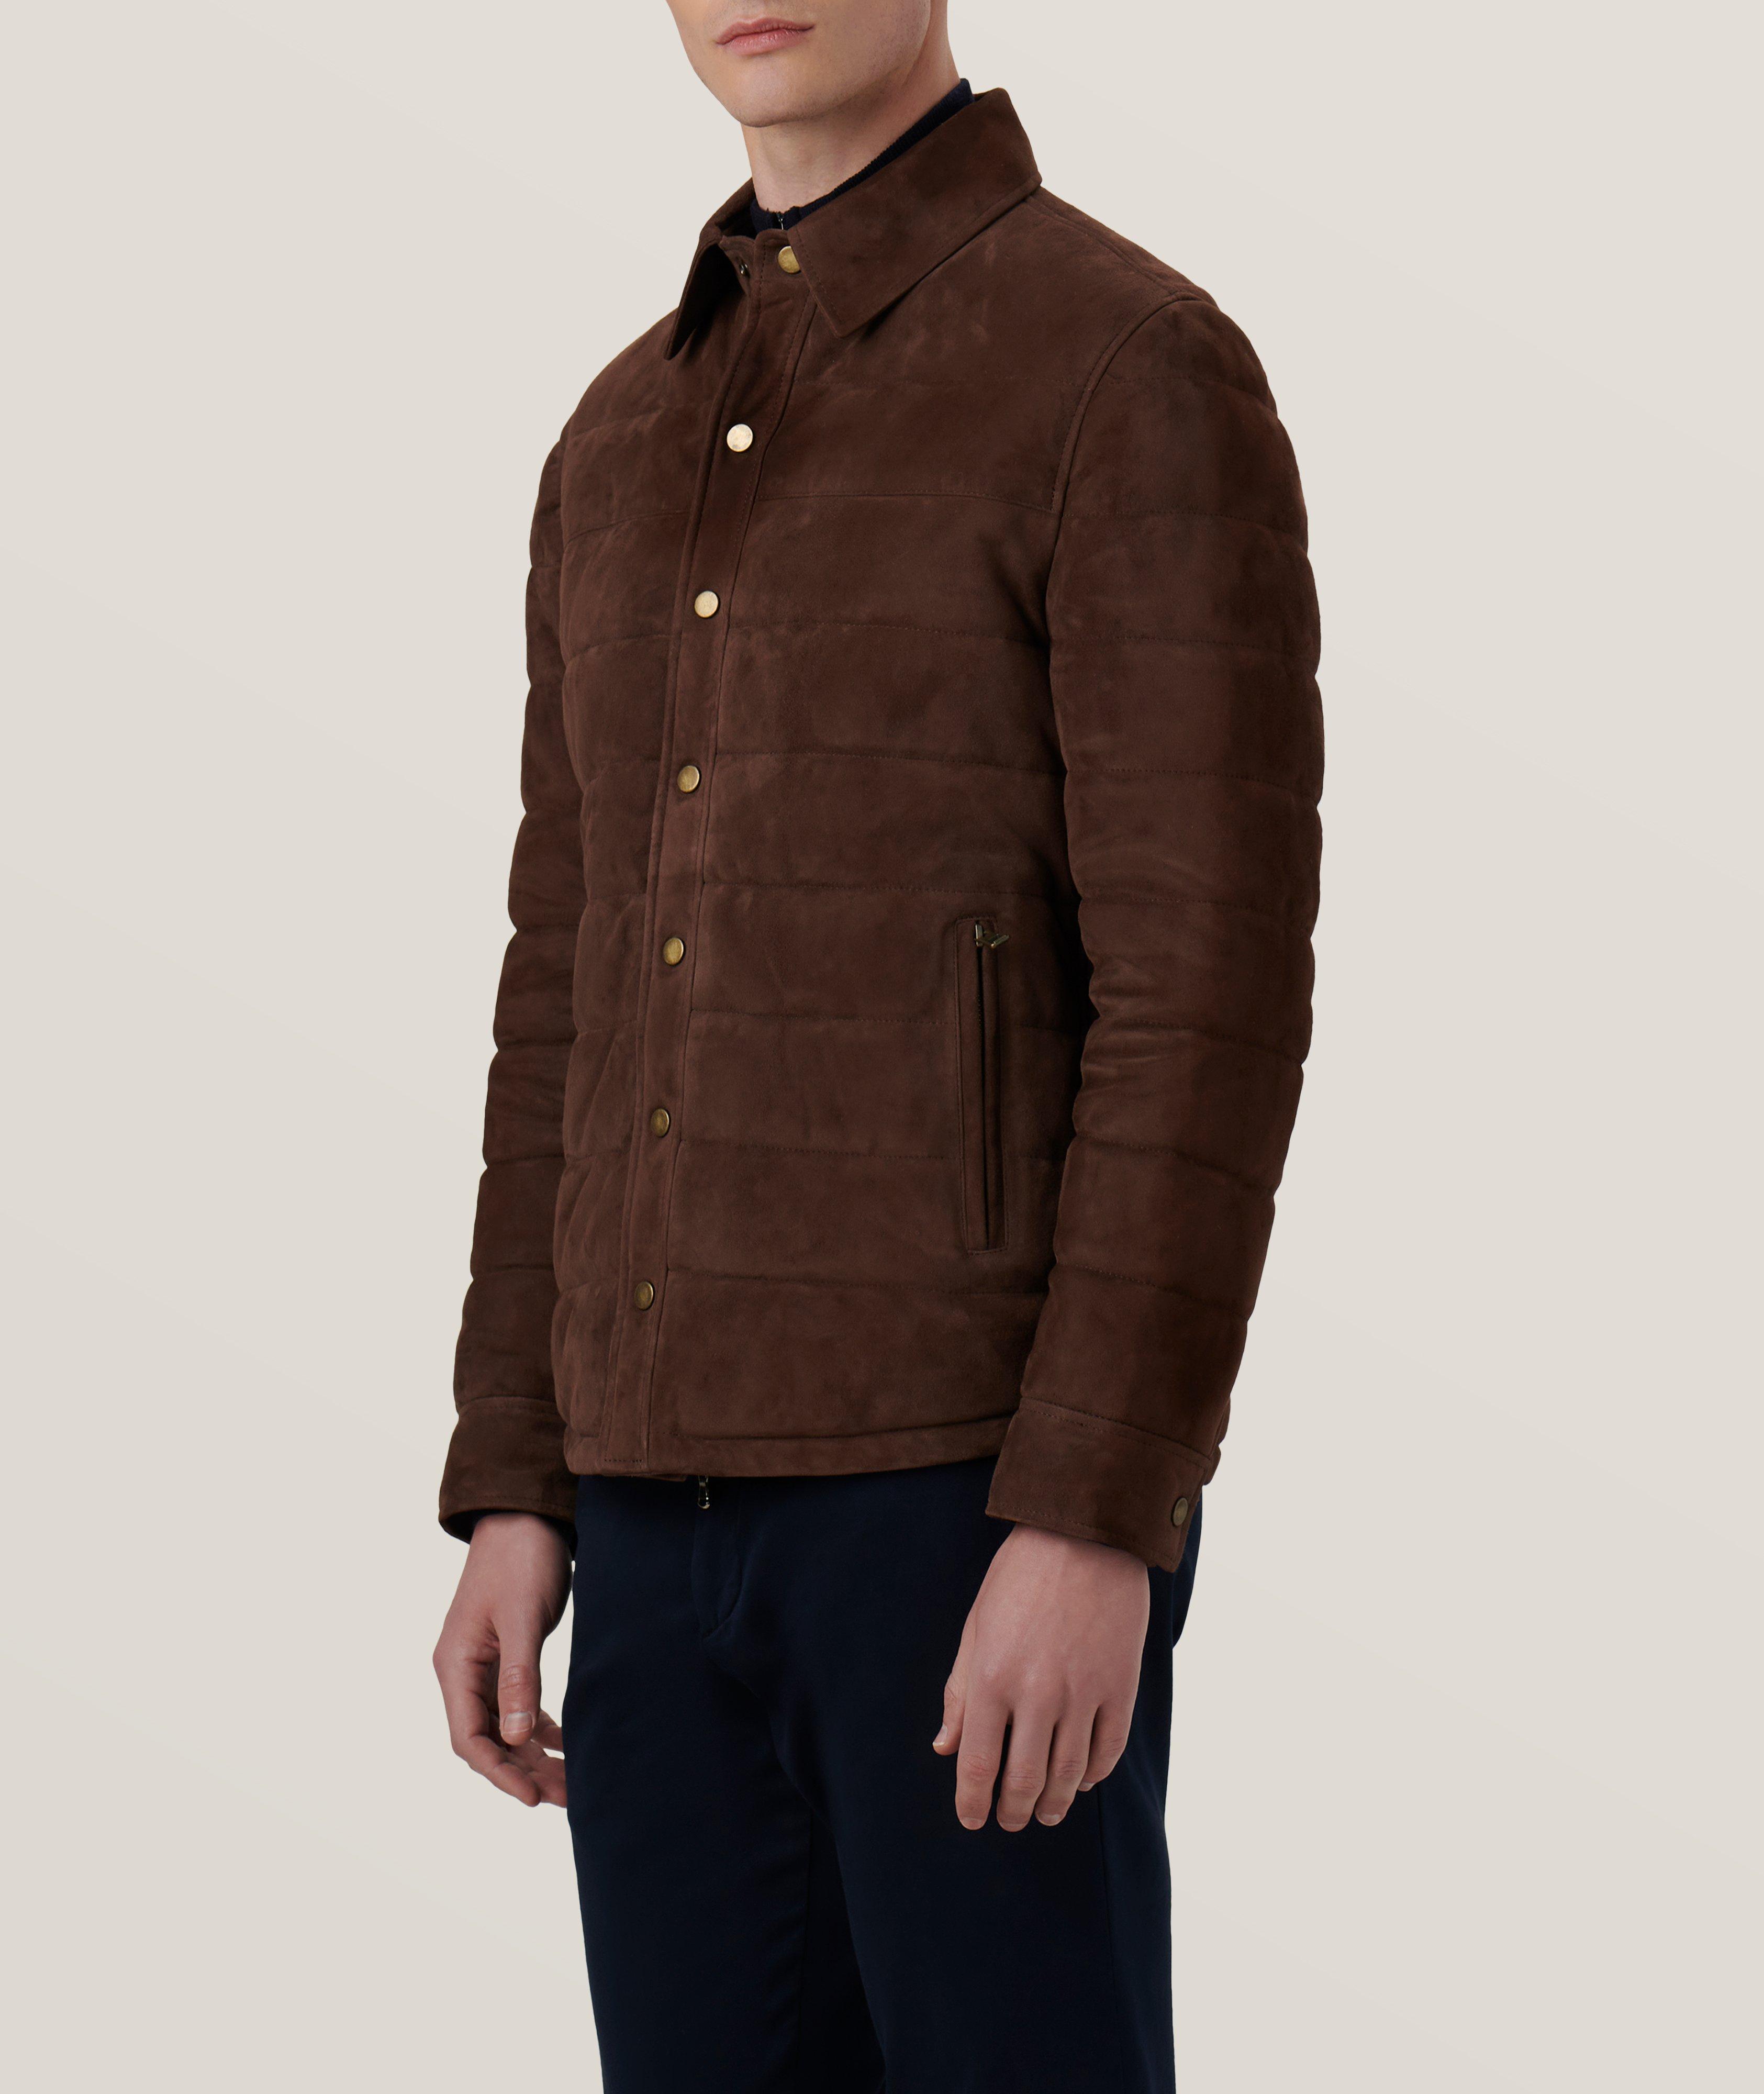 Quilted Suede Jacket image 3